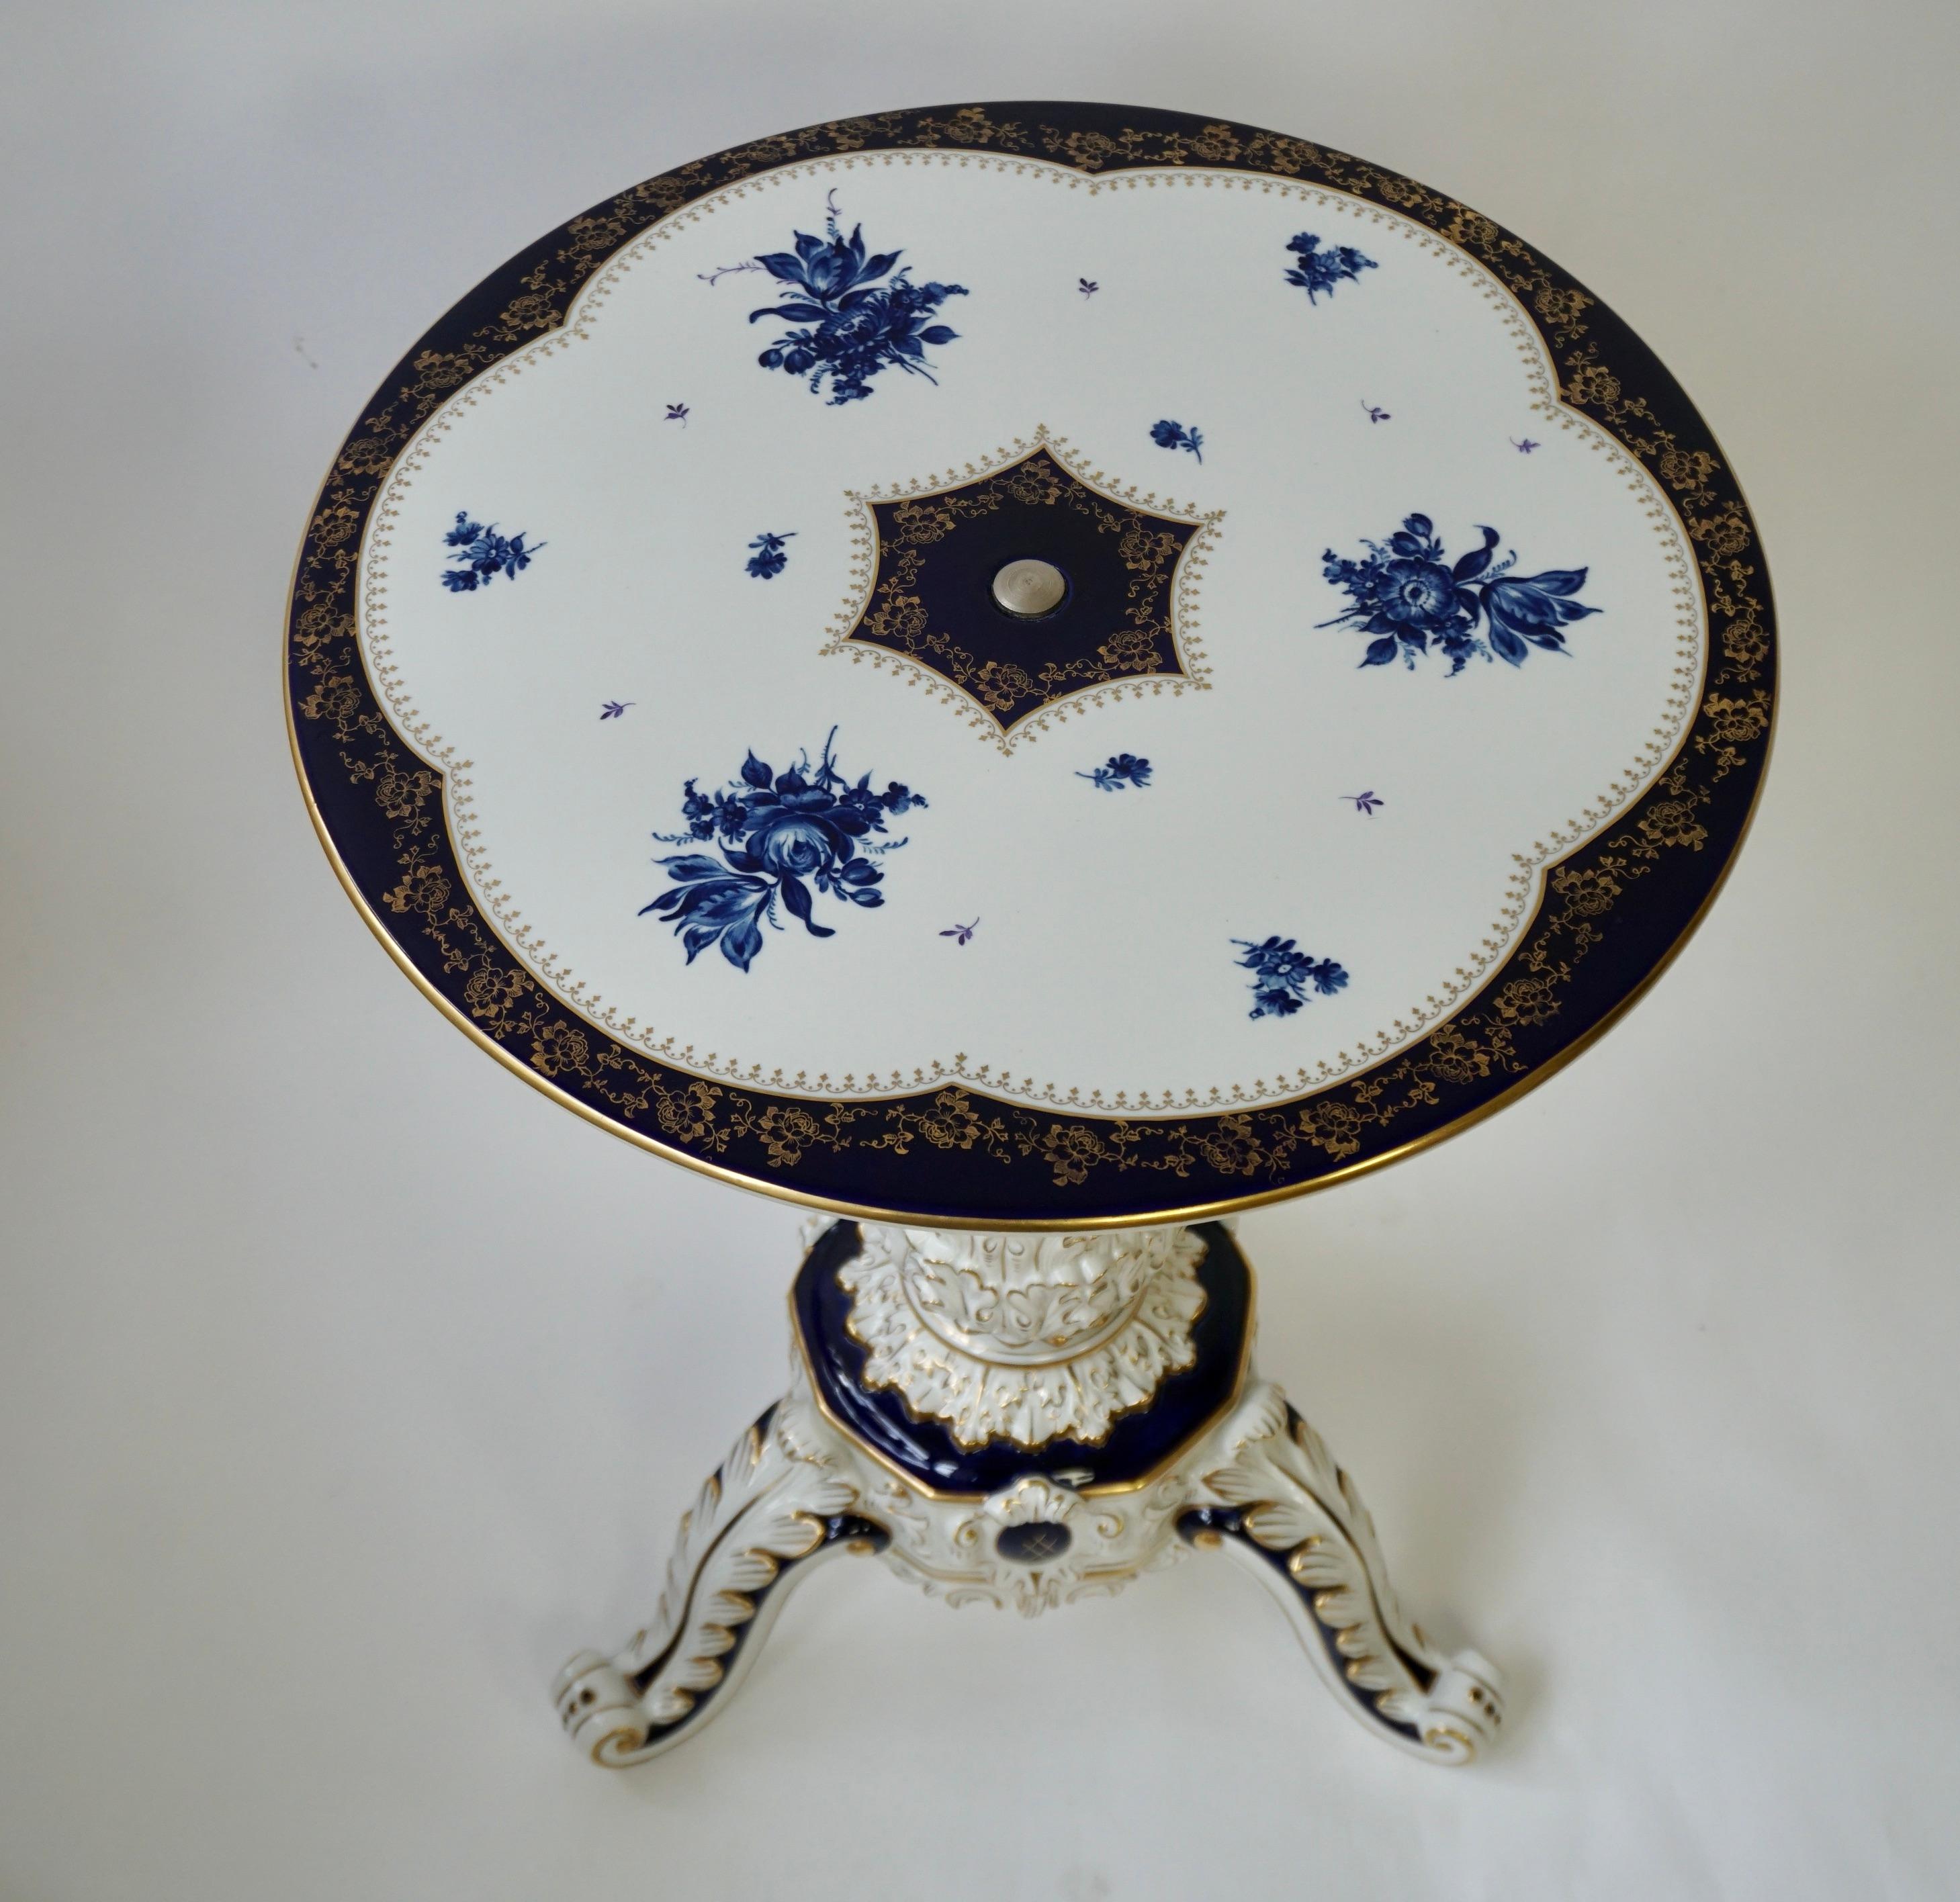 Vintage coffee table made of cobalt porcelain in rococo style.  

Artist's signature
RMR 1817 Dresden, Germany.   

Hand-painted floral decoration in cobalt blue and gold against a white background.   

Porcelain painted with cobalt paint is